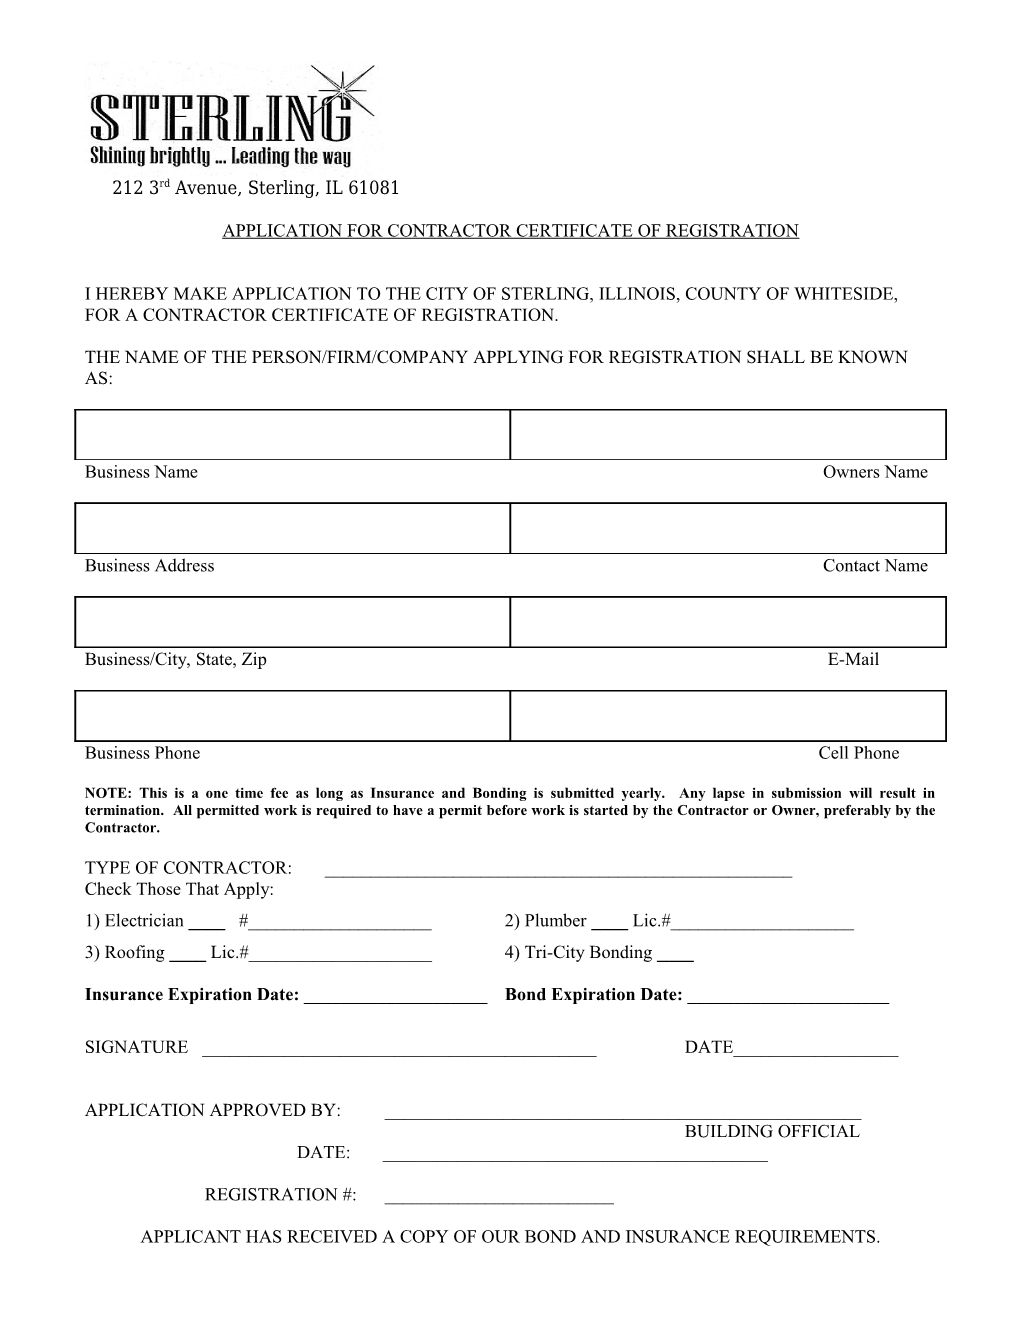 Application for Contractor Certificate of Registration